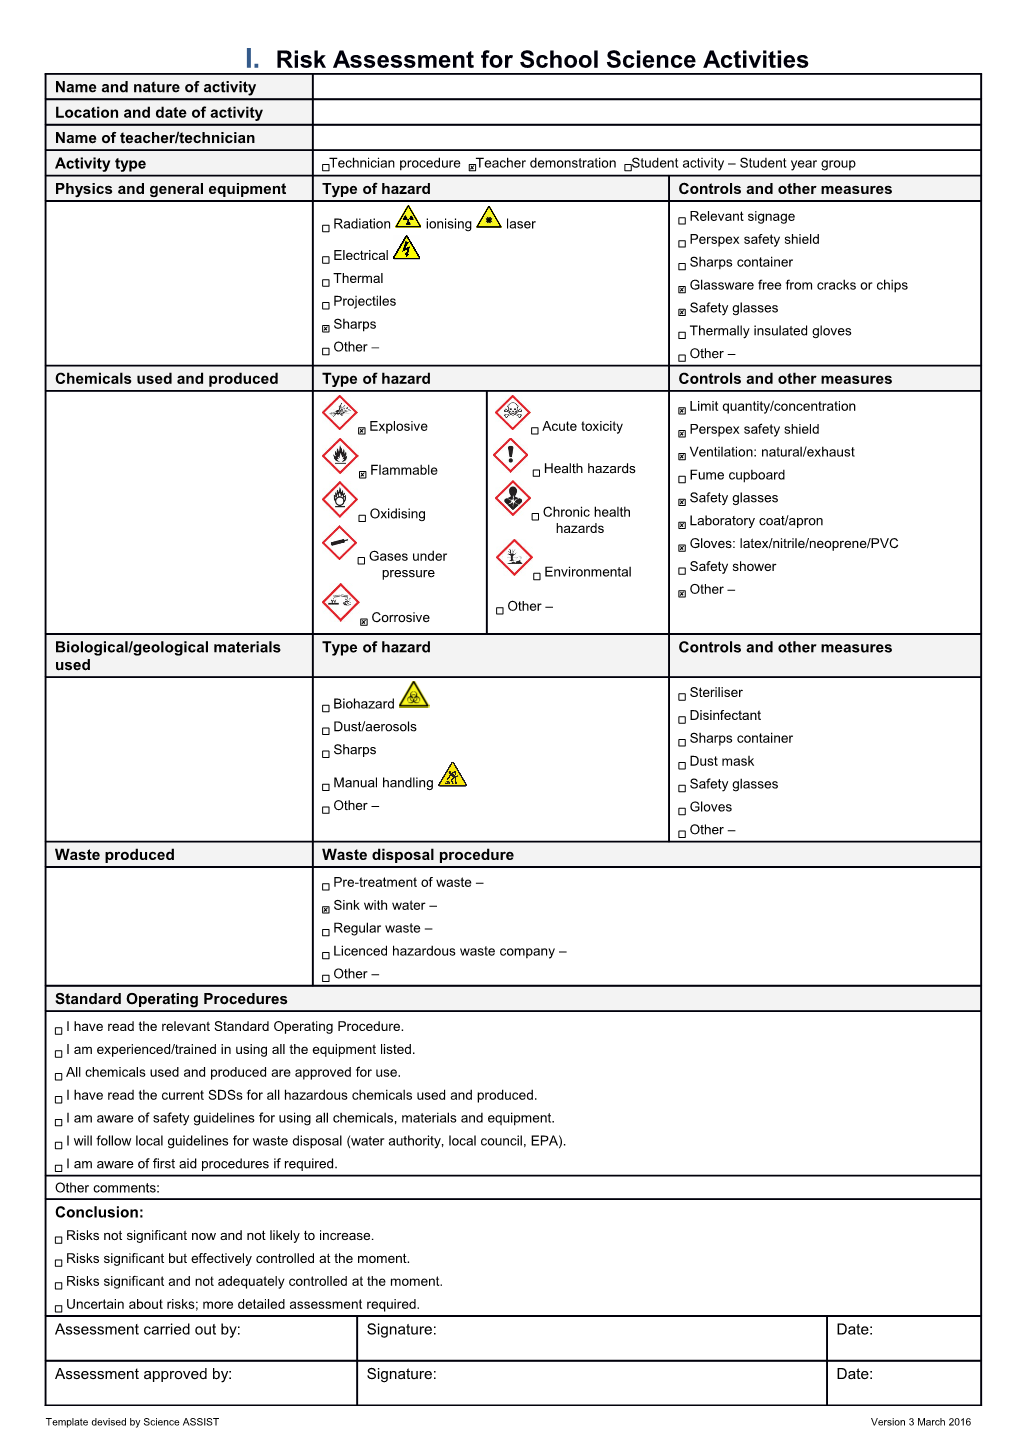 Risk Assessment for School Science Activities s1